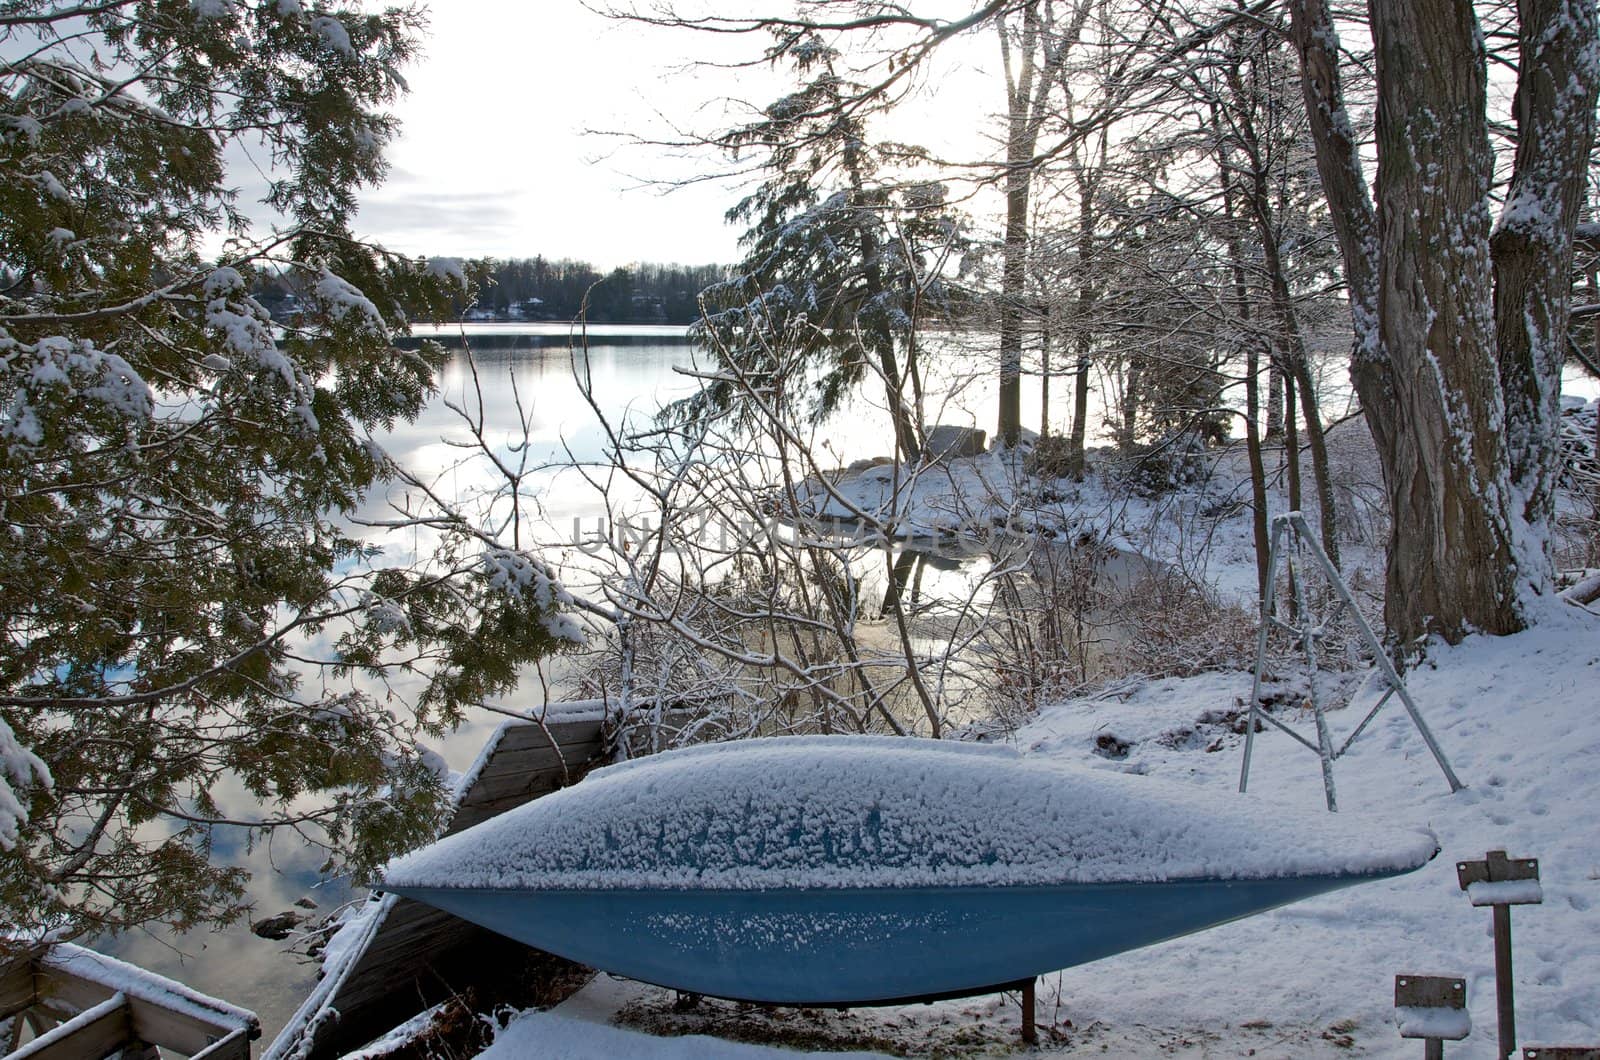 A canoe pulled out of a Canadian lake in winter time.